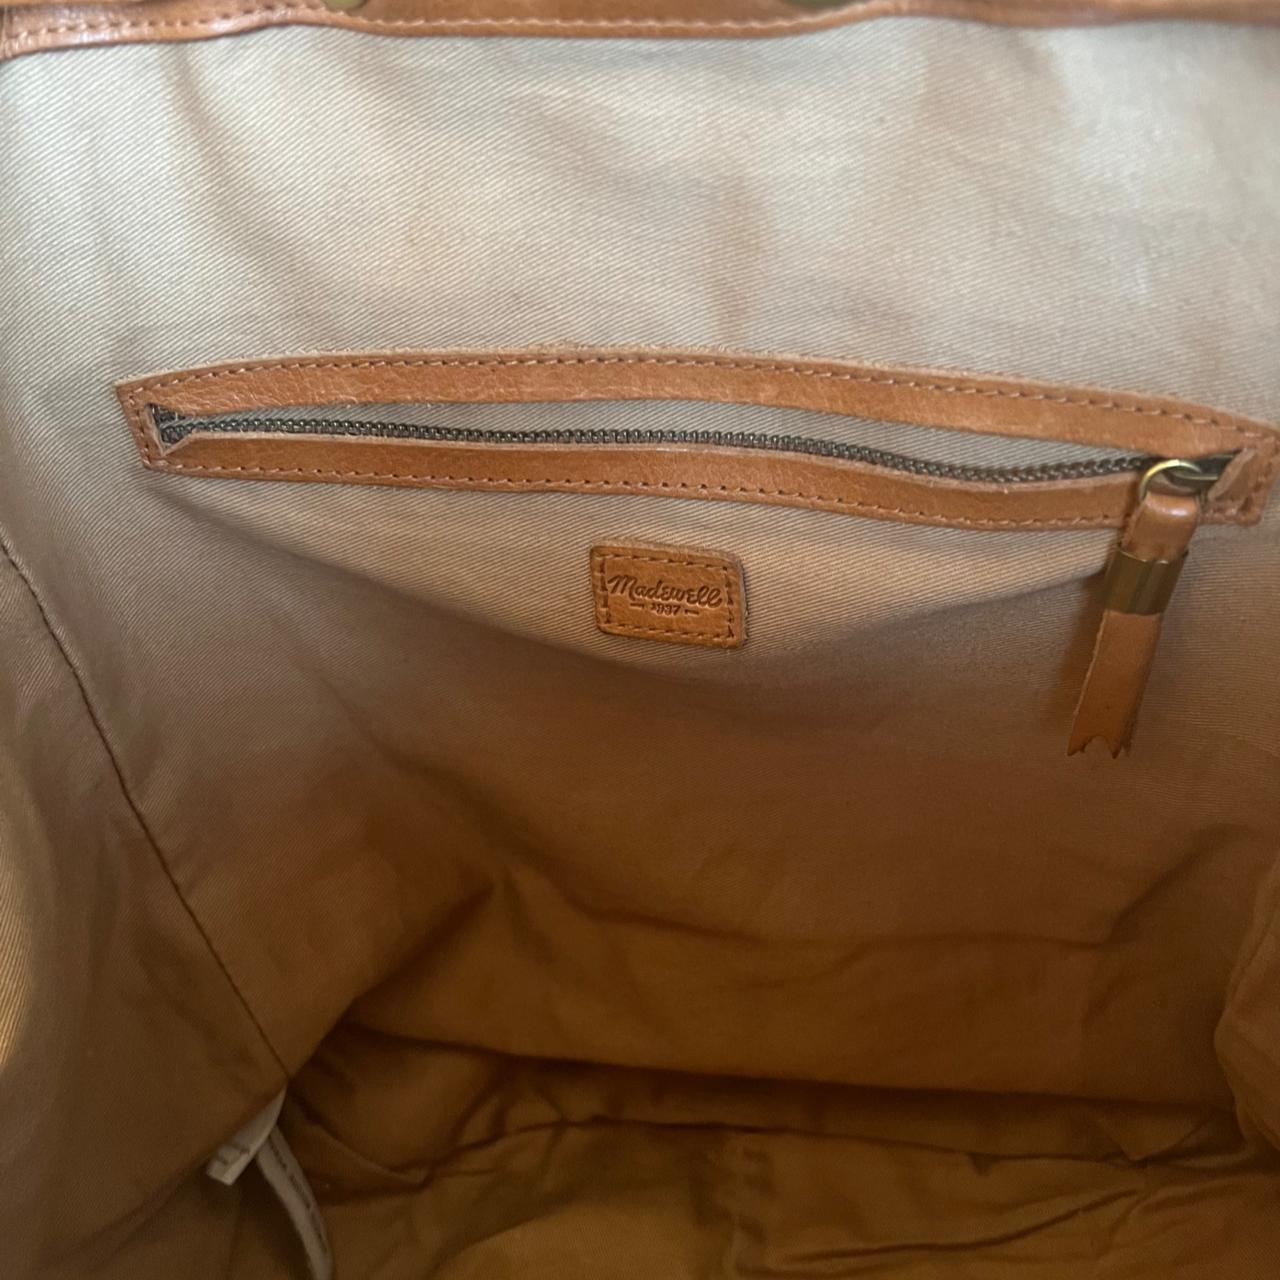 Madewell canvas and leather fold over top backpack - Depop